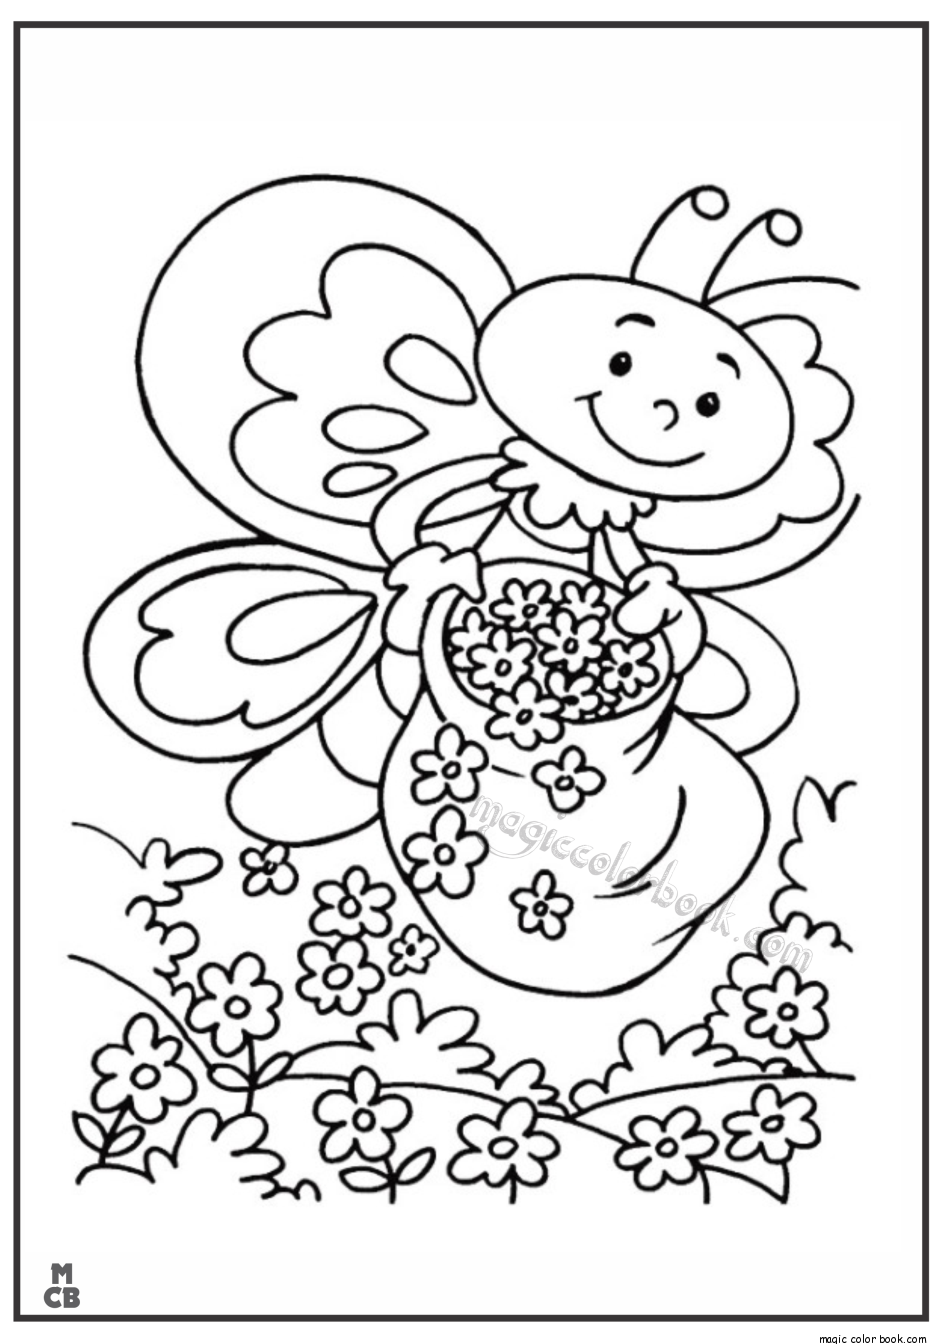 Coloring page: Spring season (Nature) #164993 - Free Printable Coloring Pages